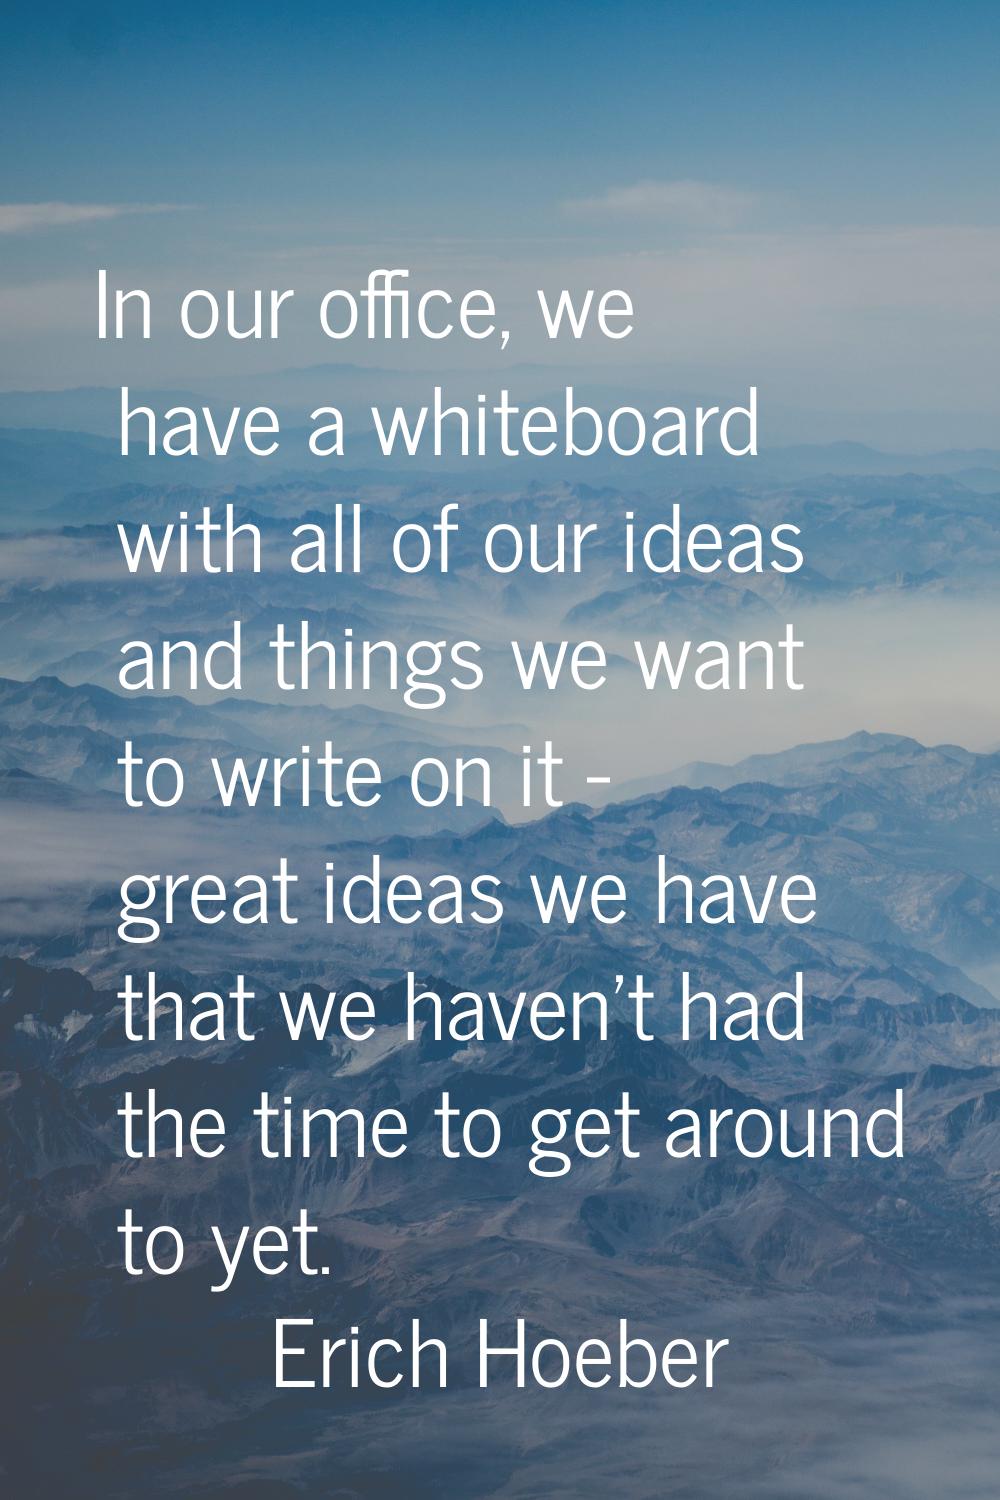 In our office, we have a whiteboard with all of our ideas and things we want to write on it - great